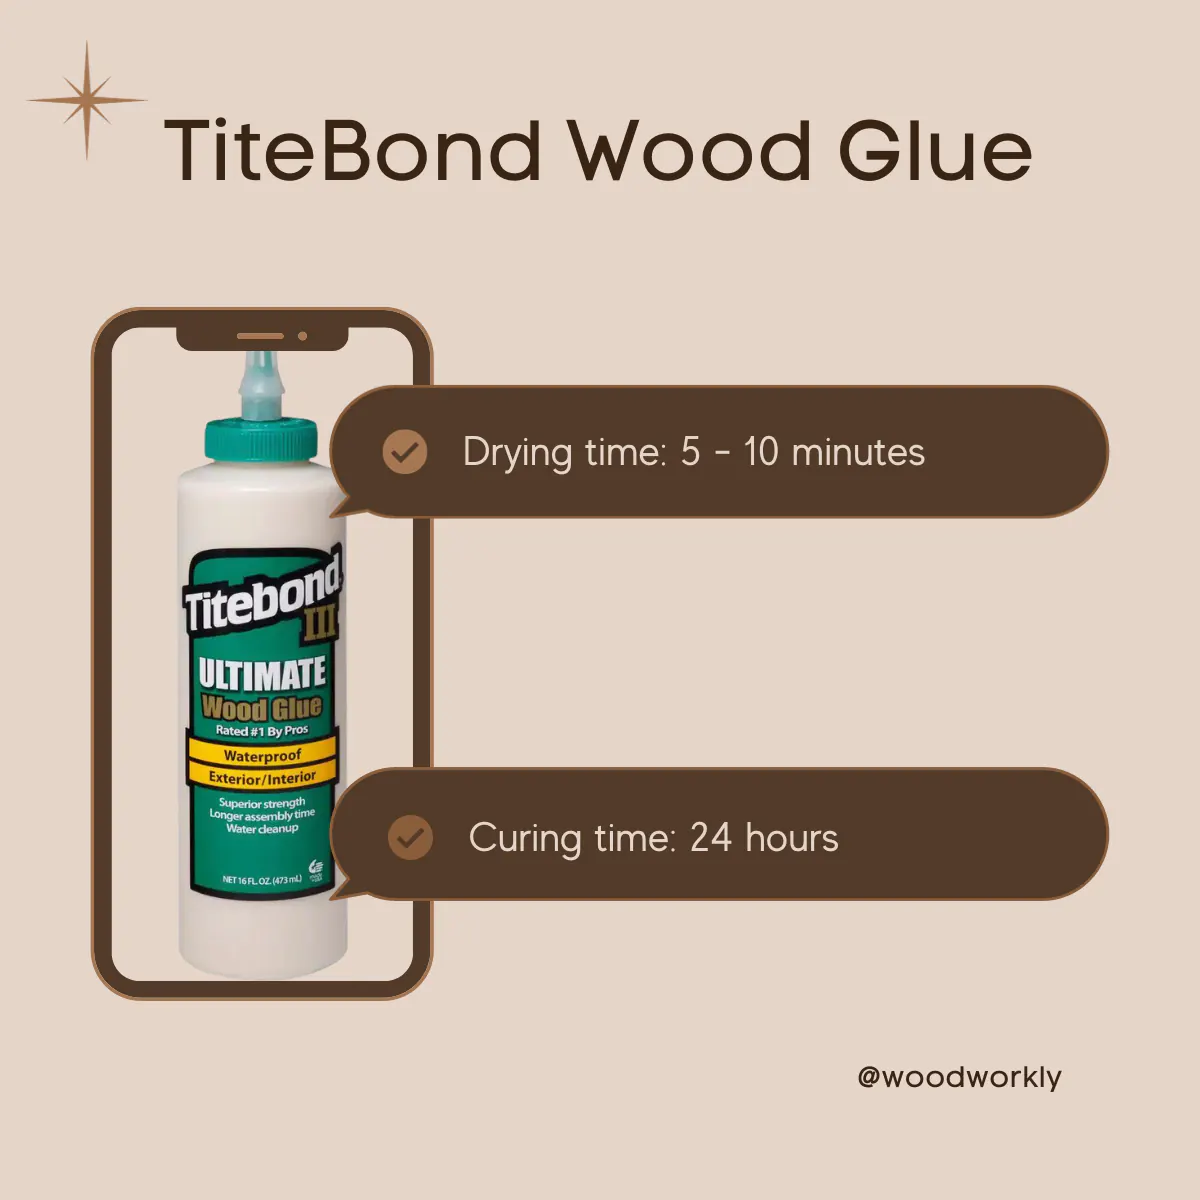 TiteBond Wood Glue drying time and curing time